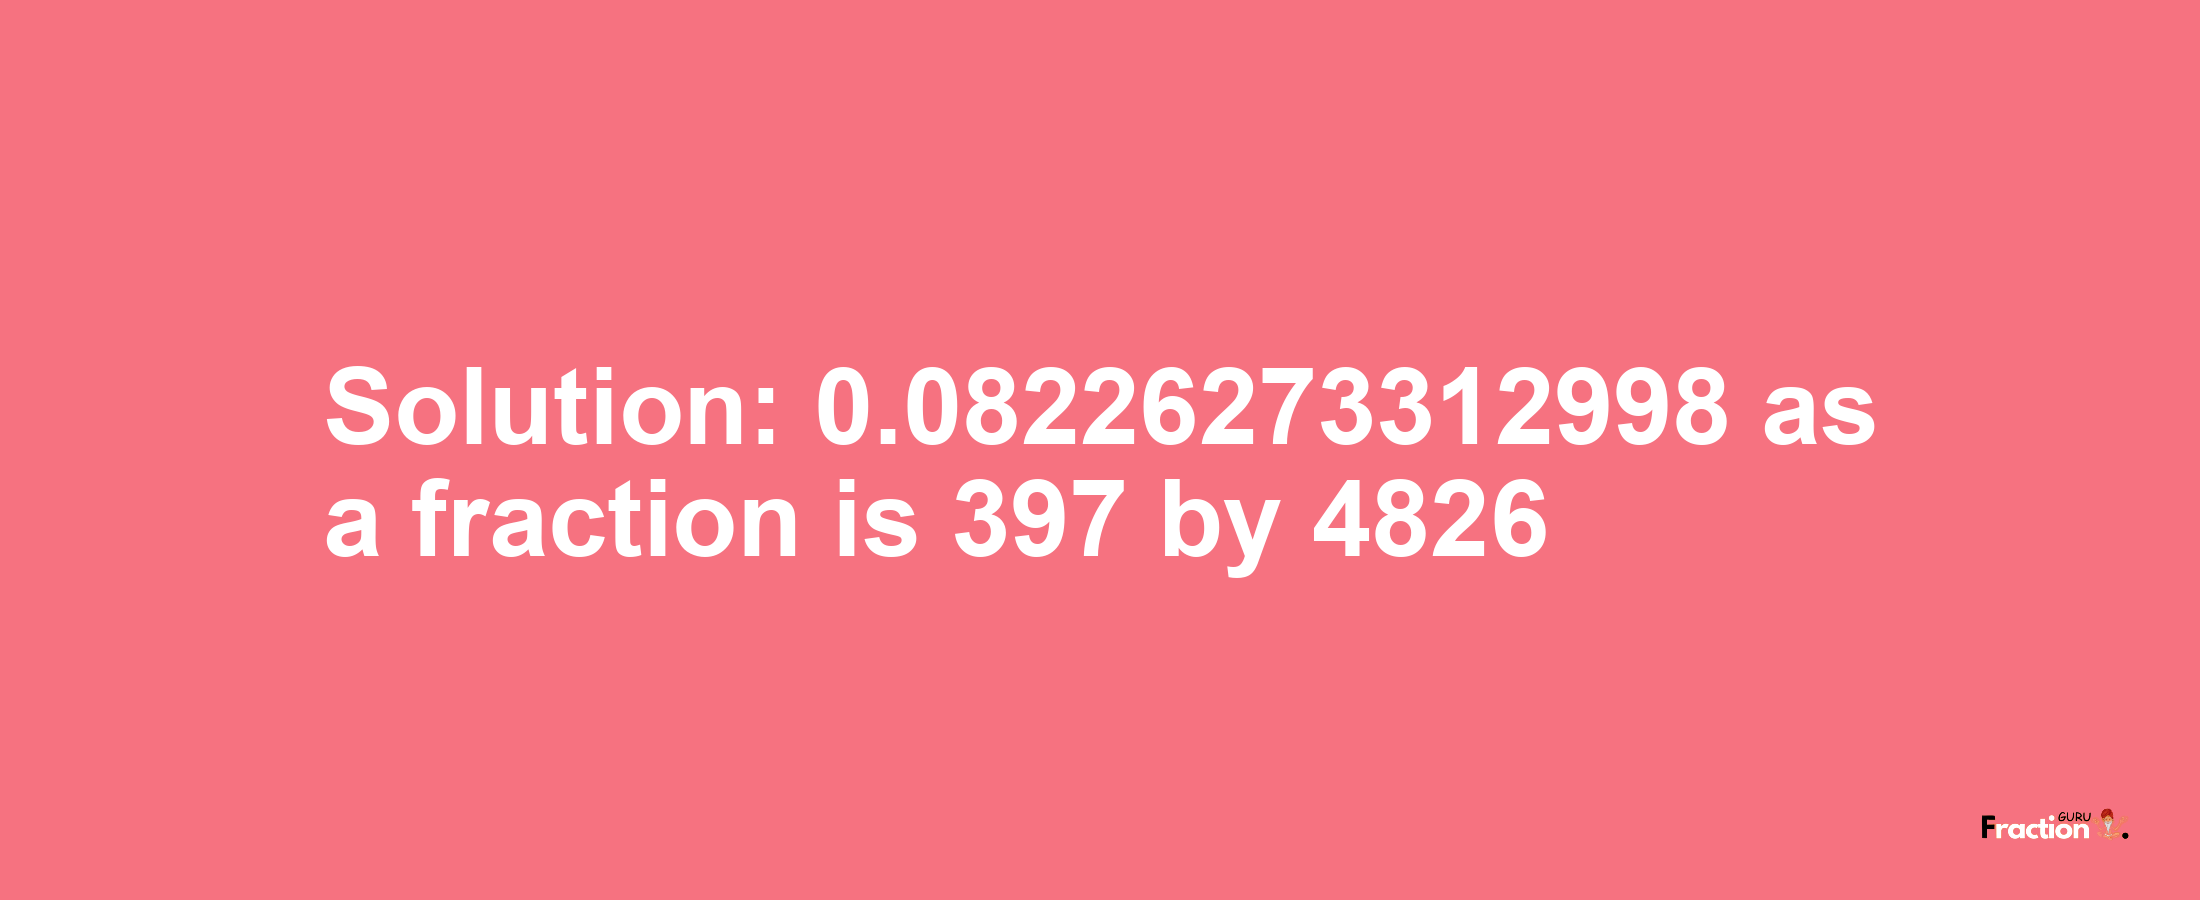 Solution:0.08226273312998 as a fraction is 397/4826